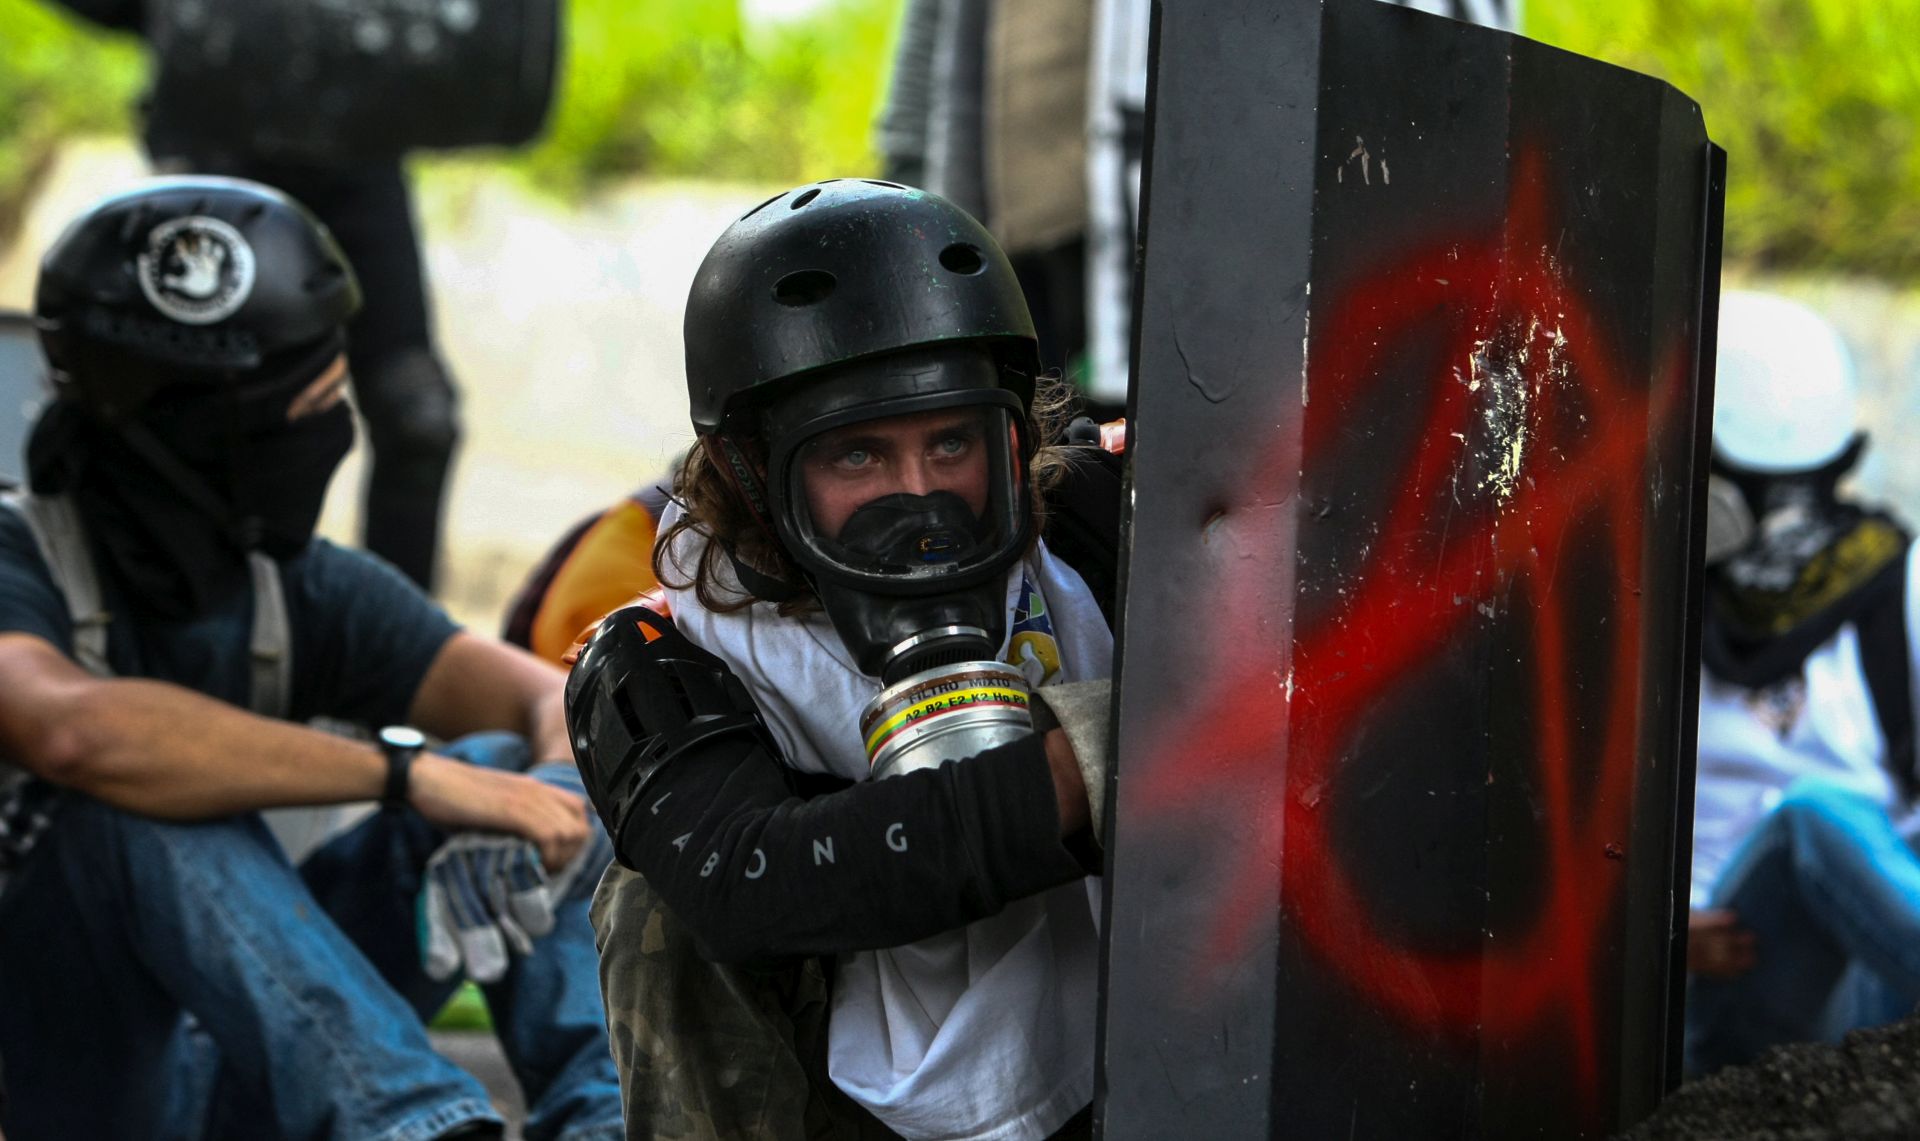 epa06028727 Opposition protesters face the Bolivarian National Guard (GNB) during a demonstration in Caracas, Venezuela, 14 June 2017. An opposition rally was broken up in Altamira, Caracas after some shots were reportedly fired in the area of the protest.  EPA/CRISTIAN HERNANDEZ